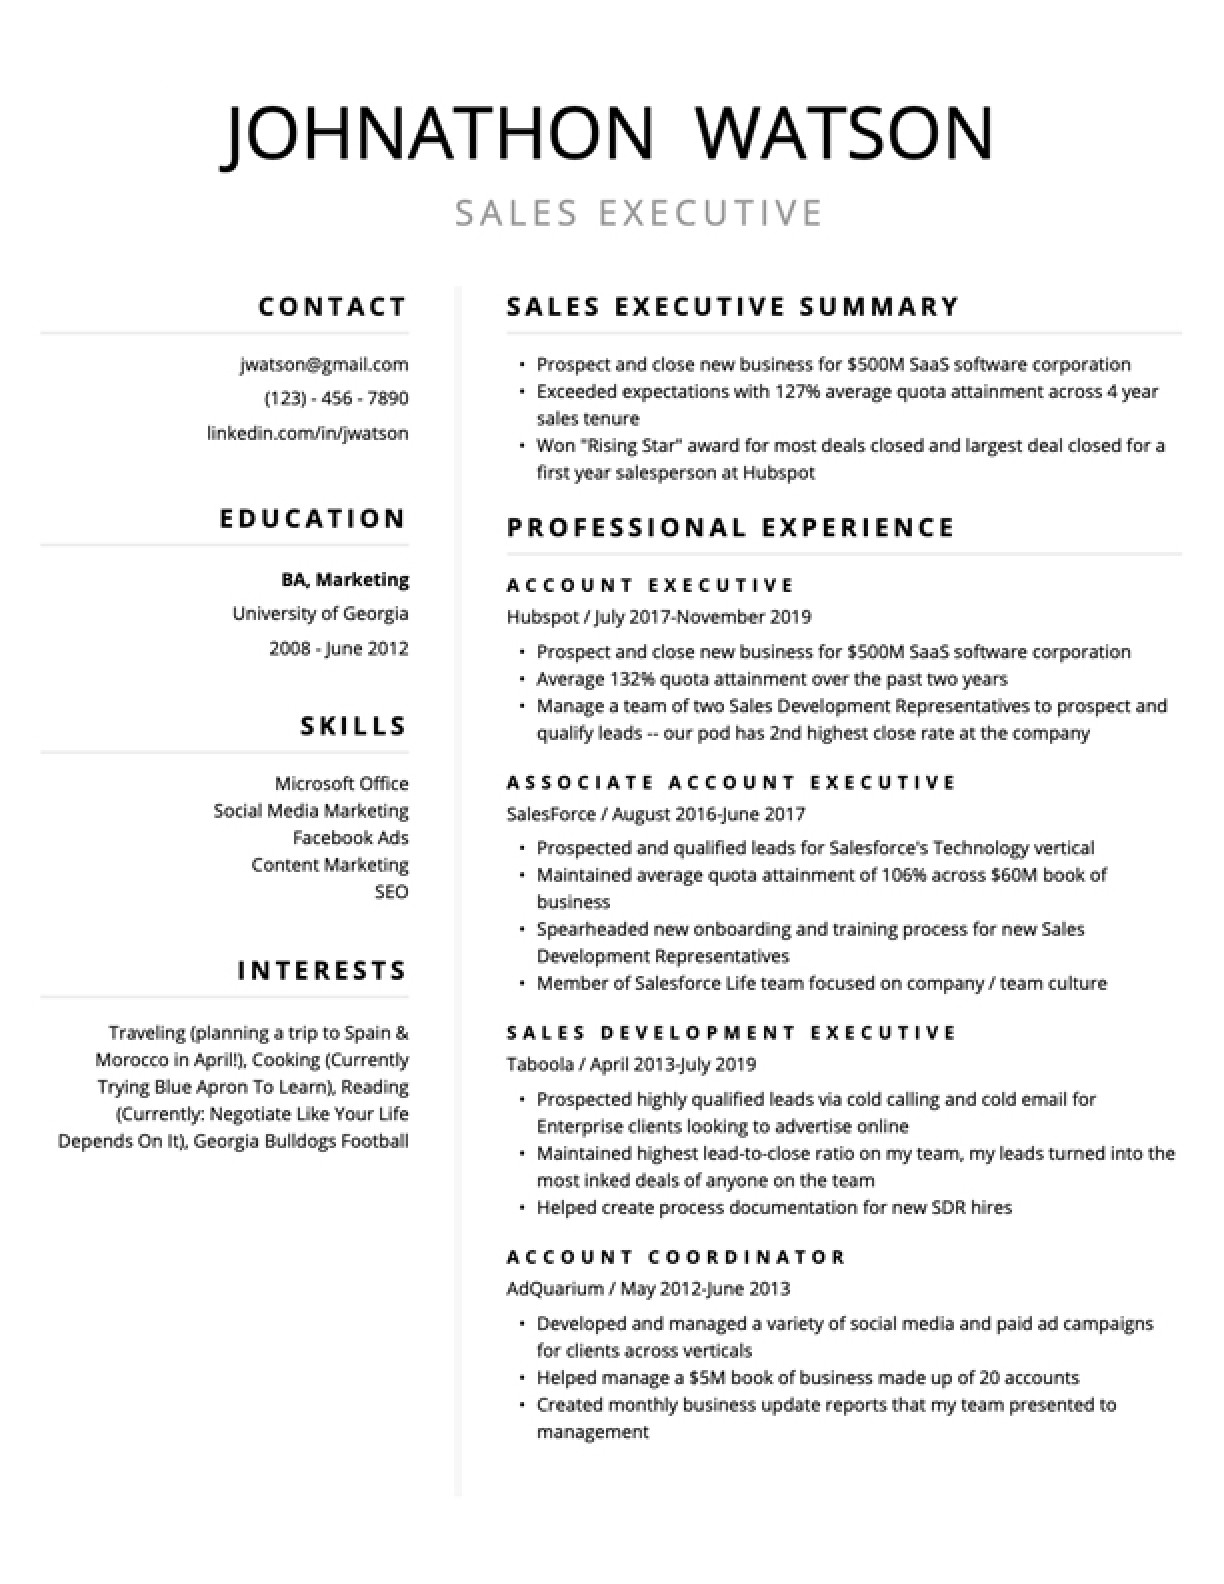 Sample Resume for Land Developement Drafting Work Free Resume Templates for 2022 (edit & Download) Resybuild.io